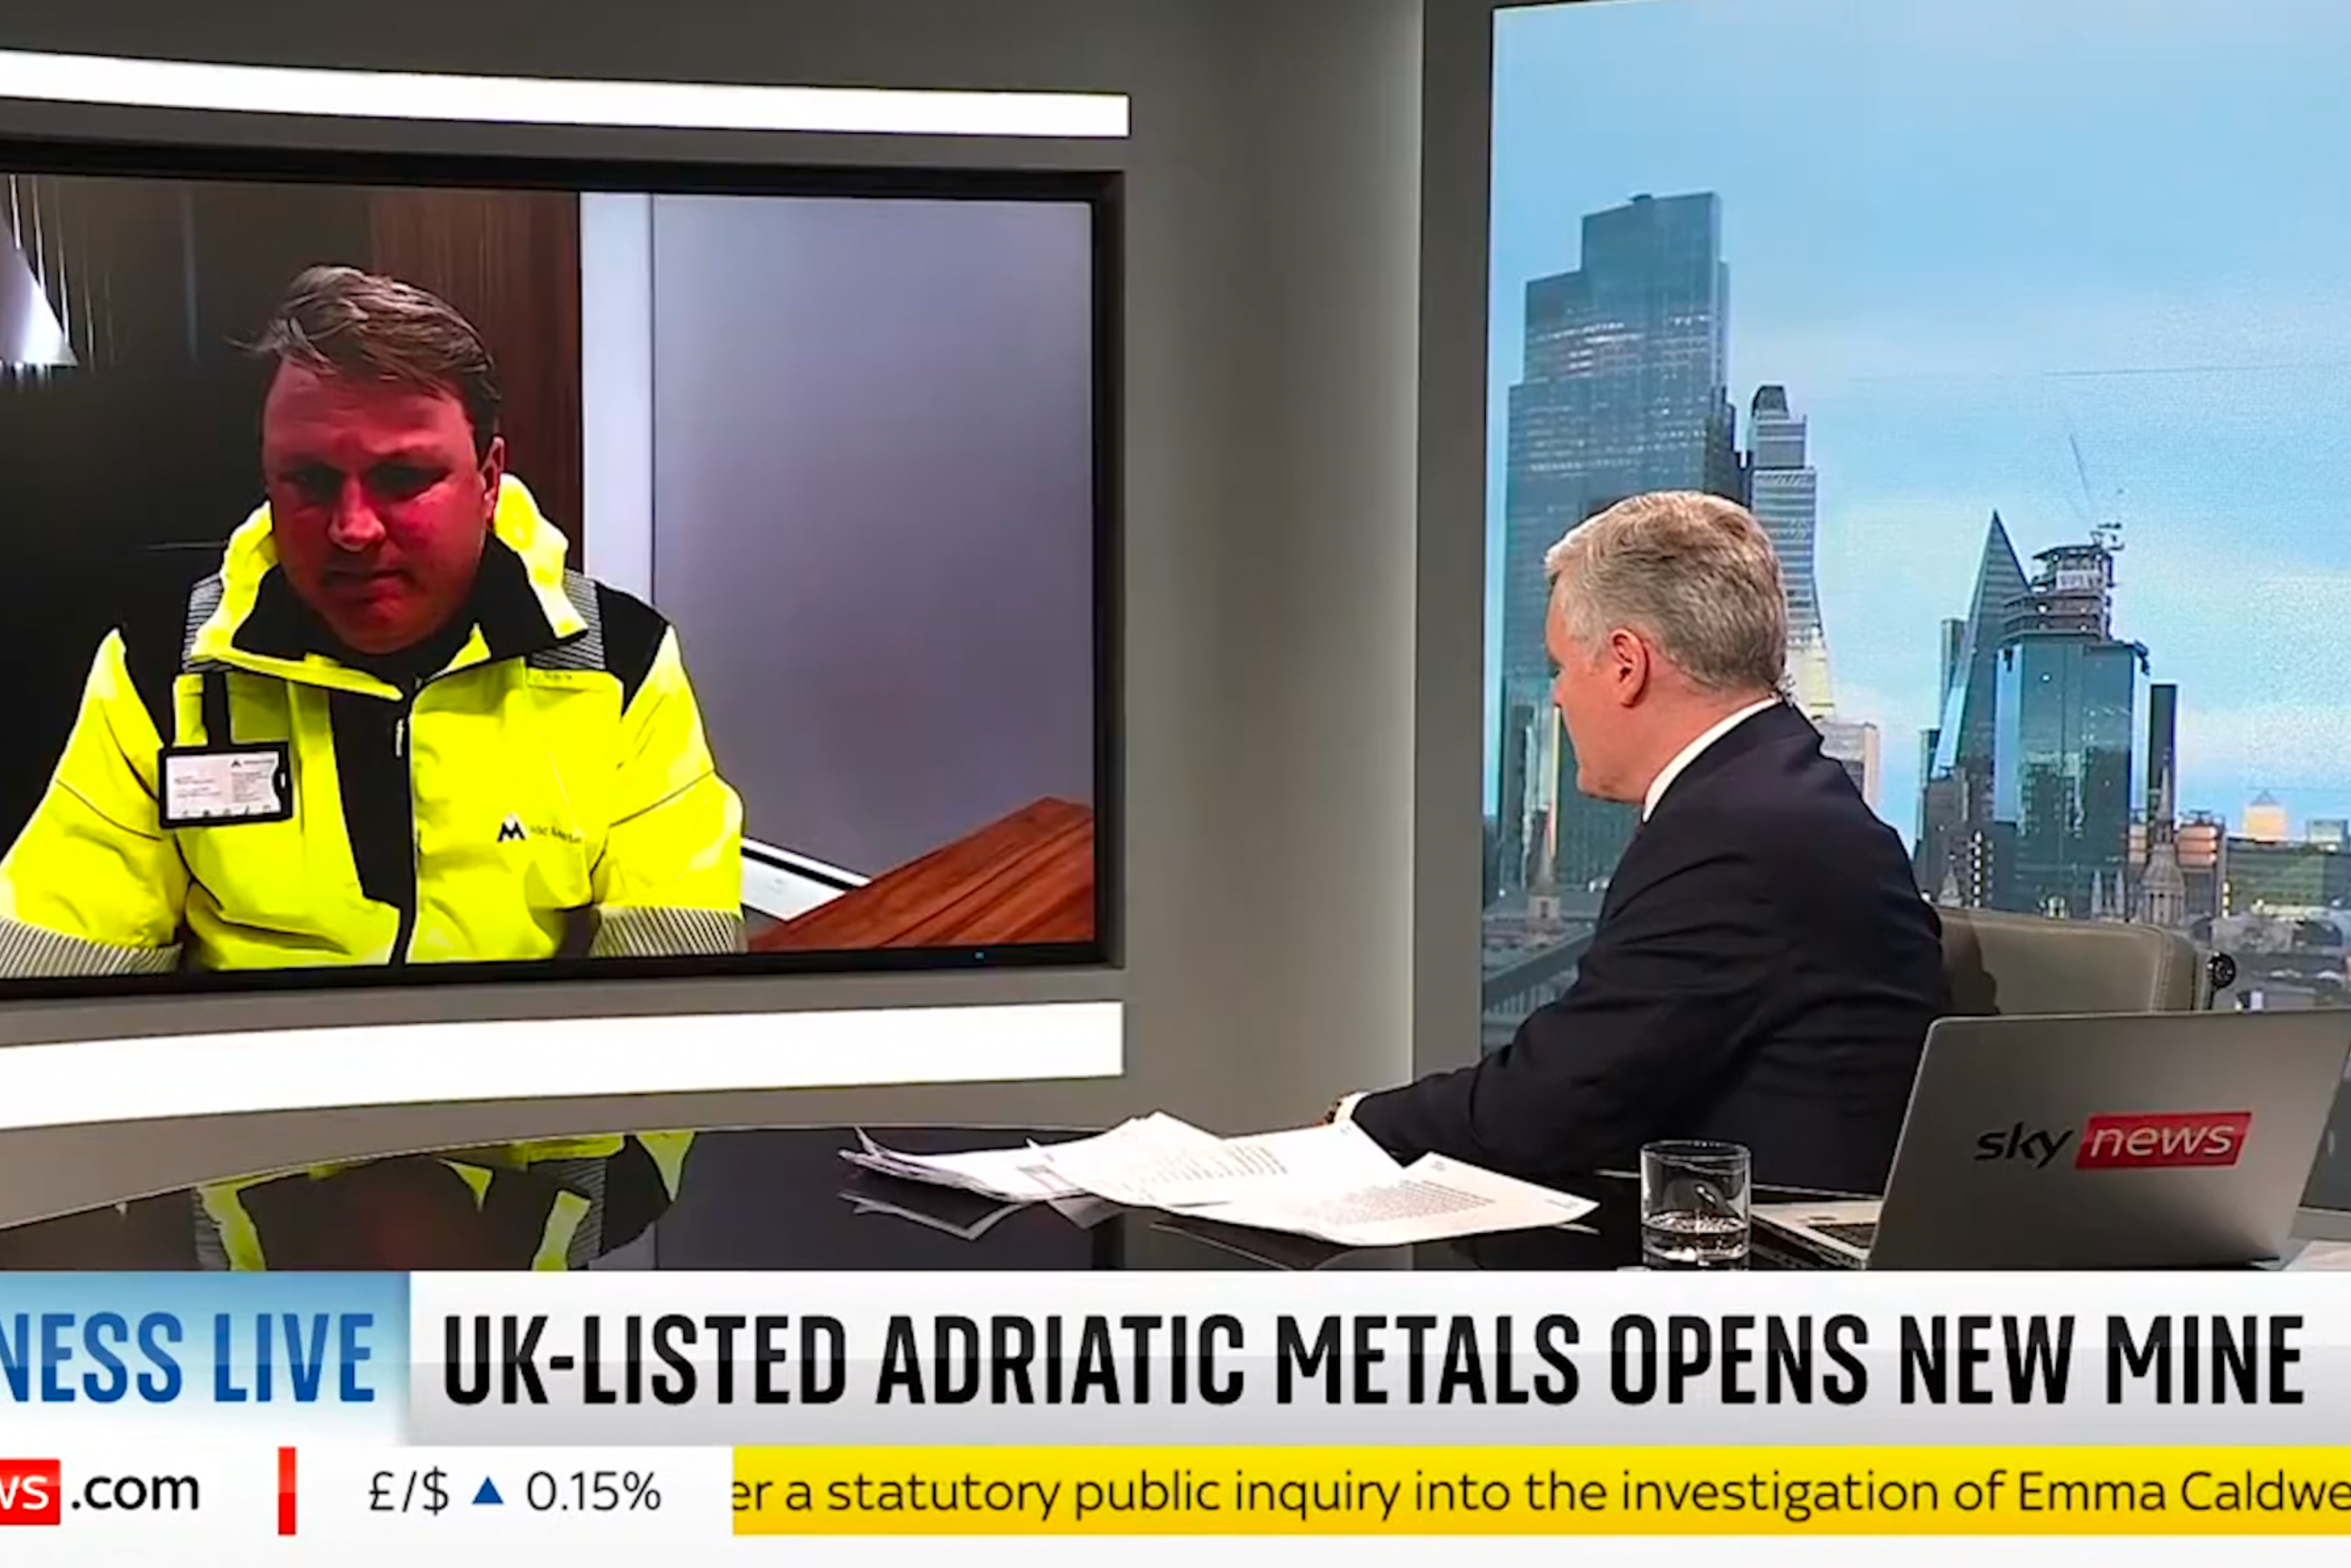 Our CEO Paul Cronin Discusses Europe's New Metals Mine on Sky News